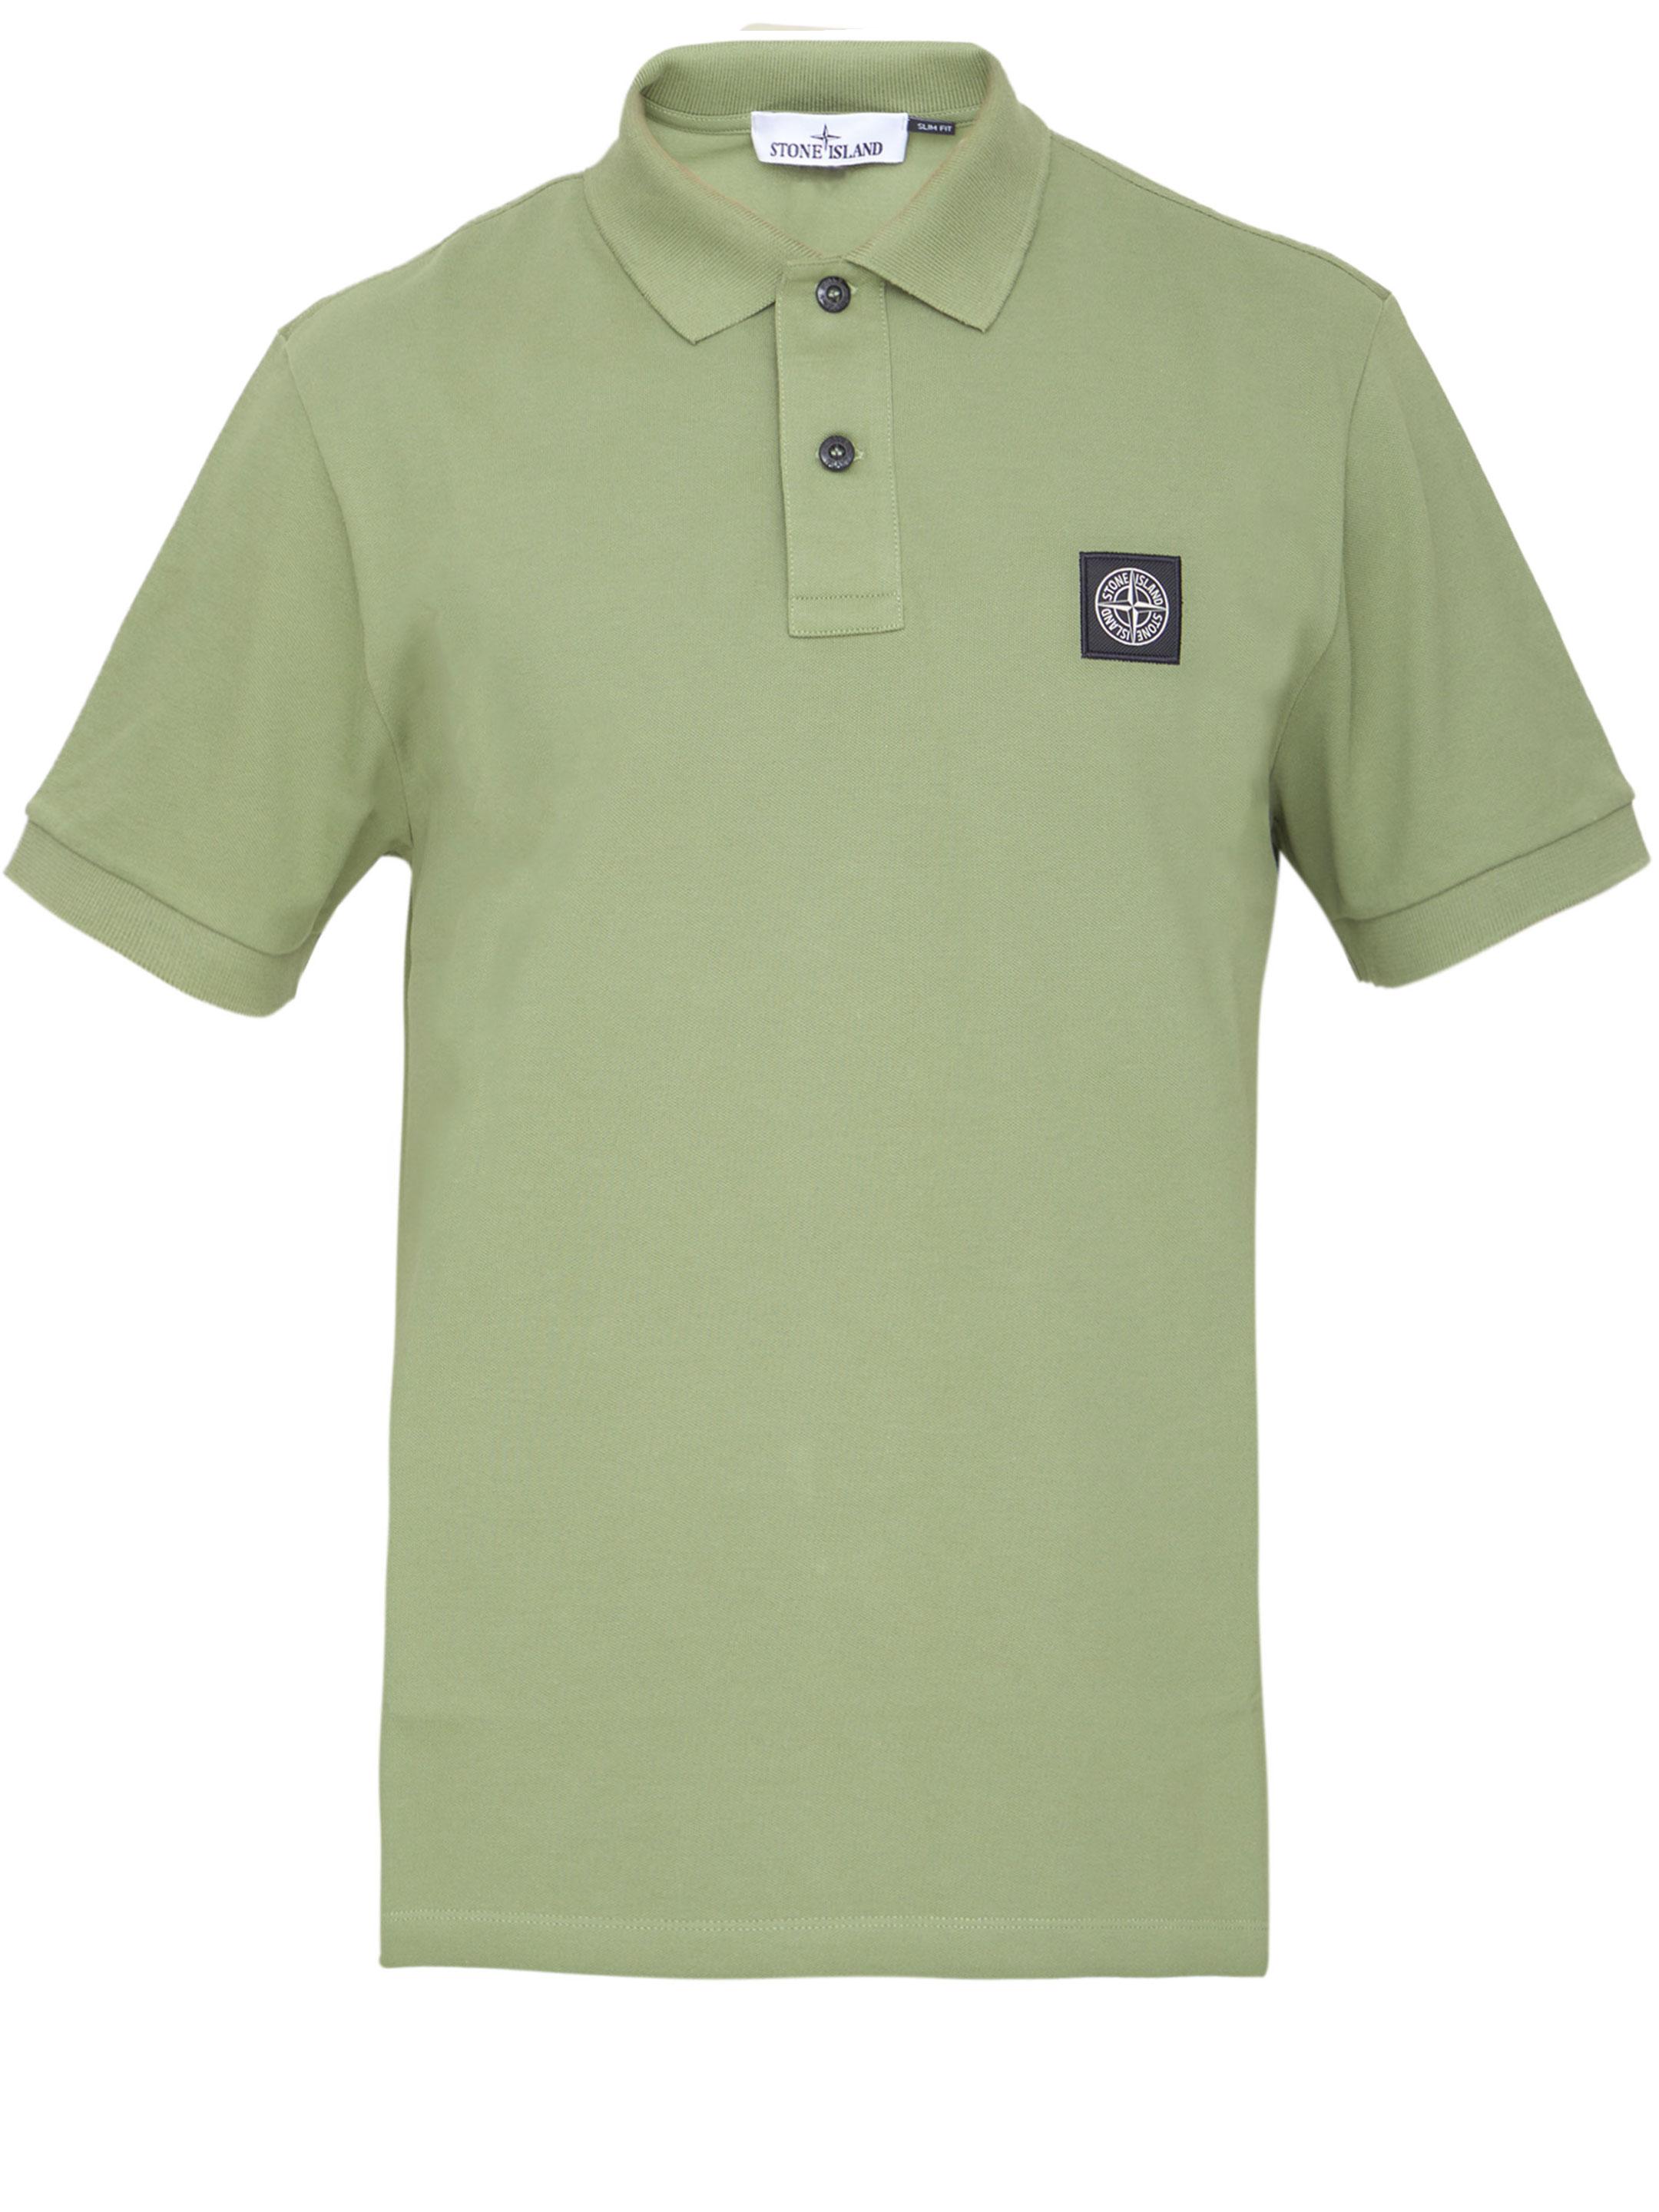 Stone Island Compass Polo Shirt in Green for Men | Lyst